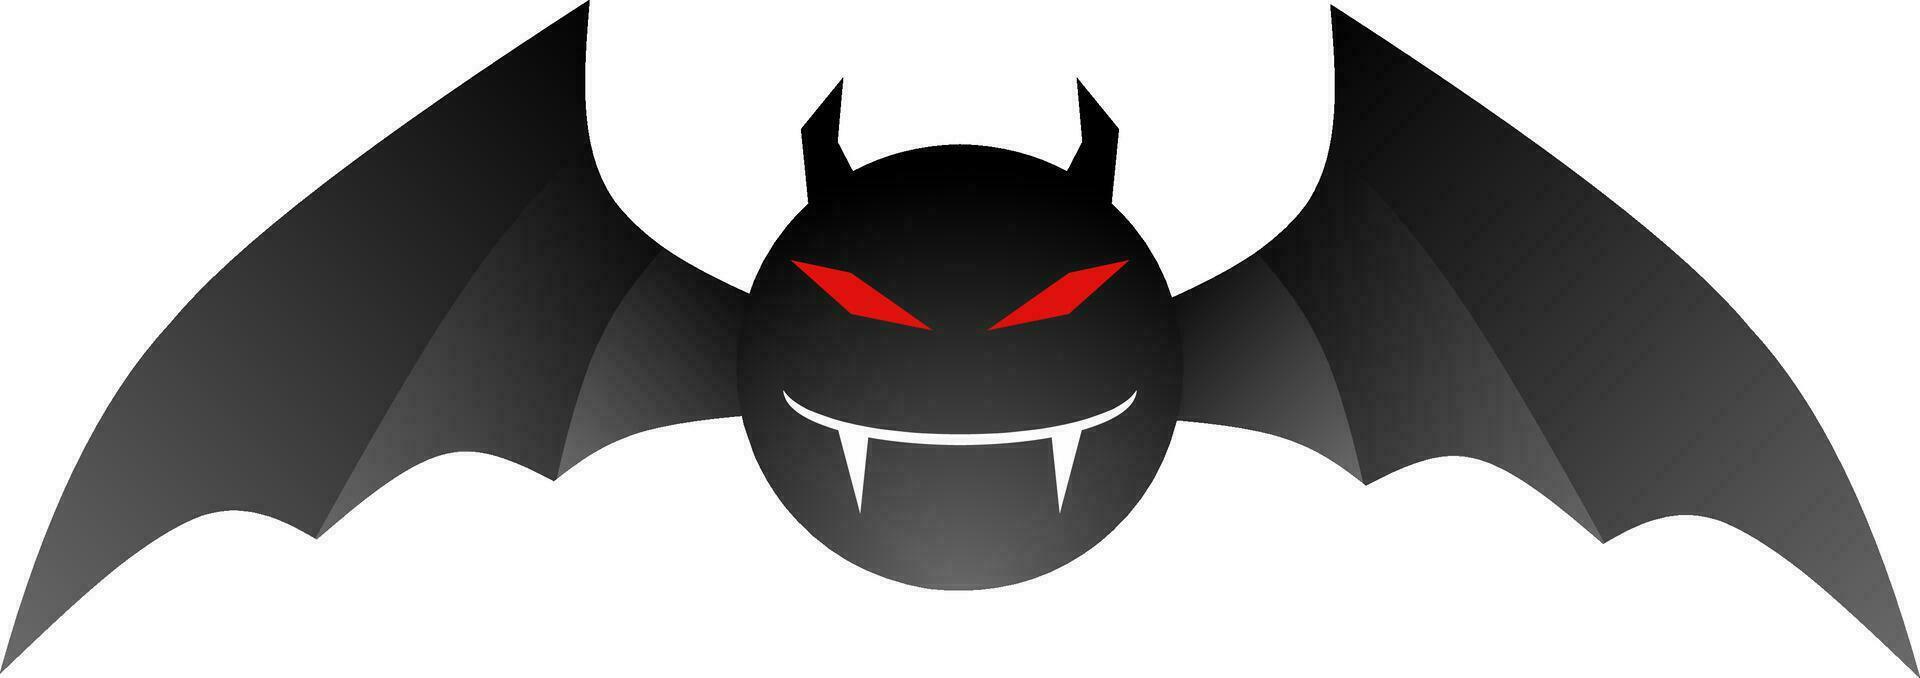 Scary bat icon vector for happy Halloween event. Halloween bat icon that can be used as symbol, sign or decoration. Spooky bat icon graphic resource for Halloween theme vector design